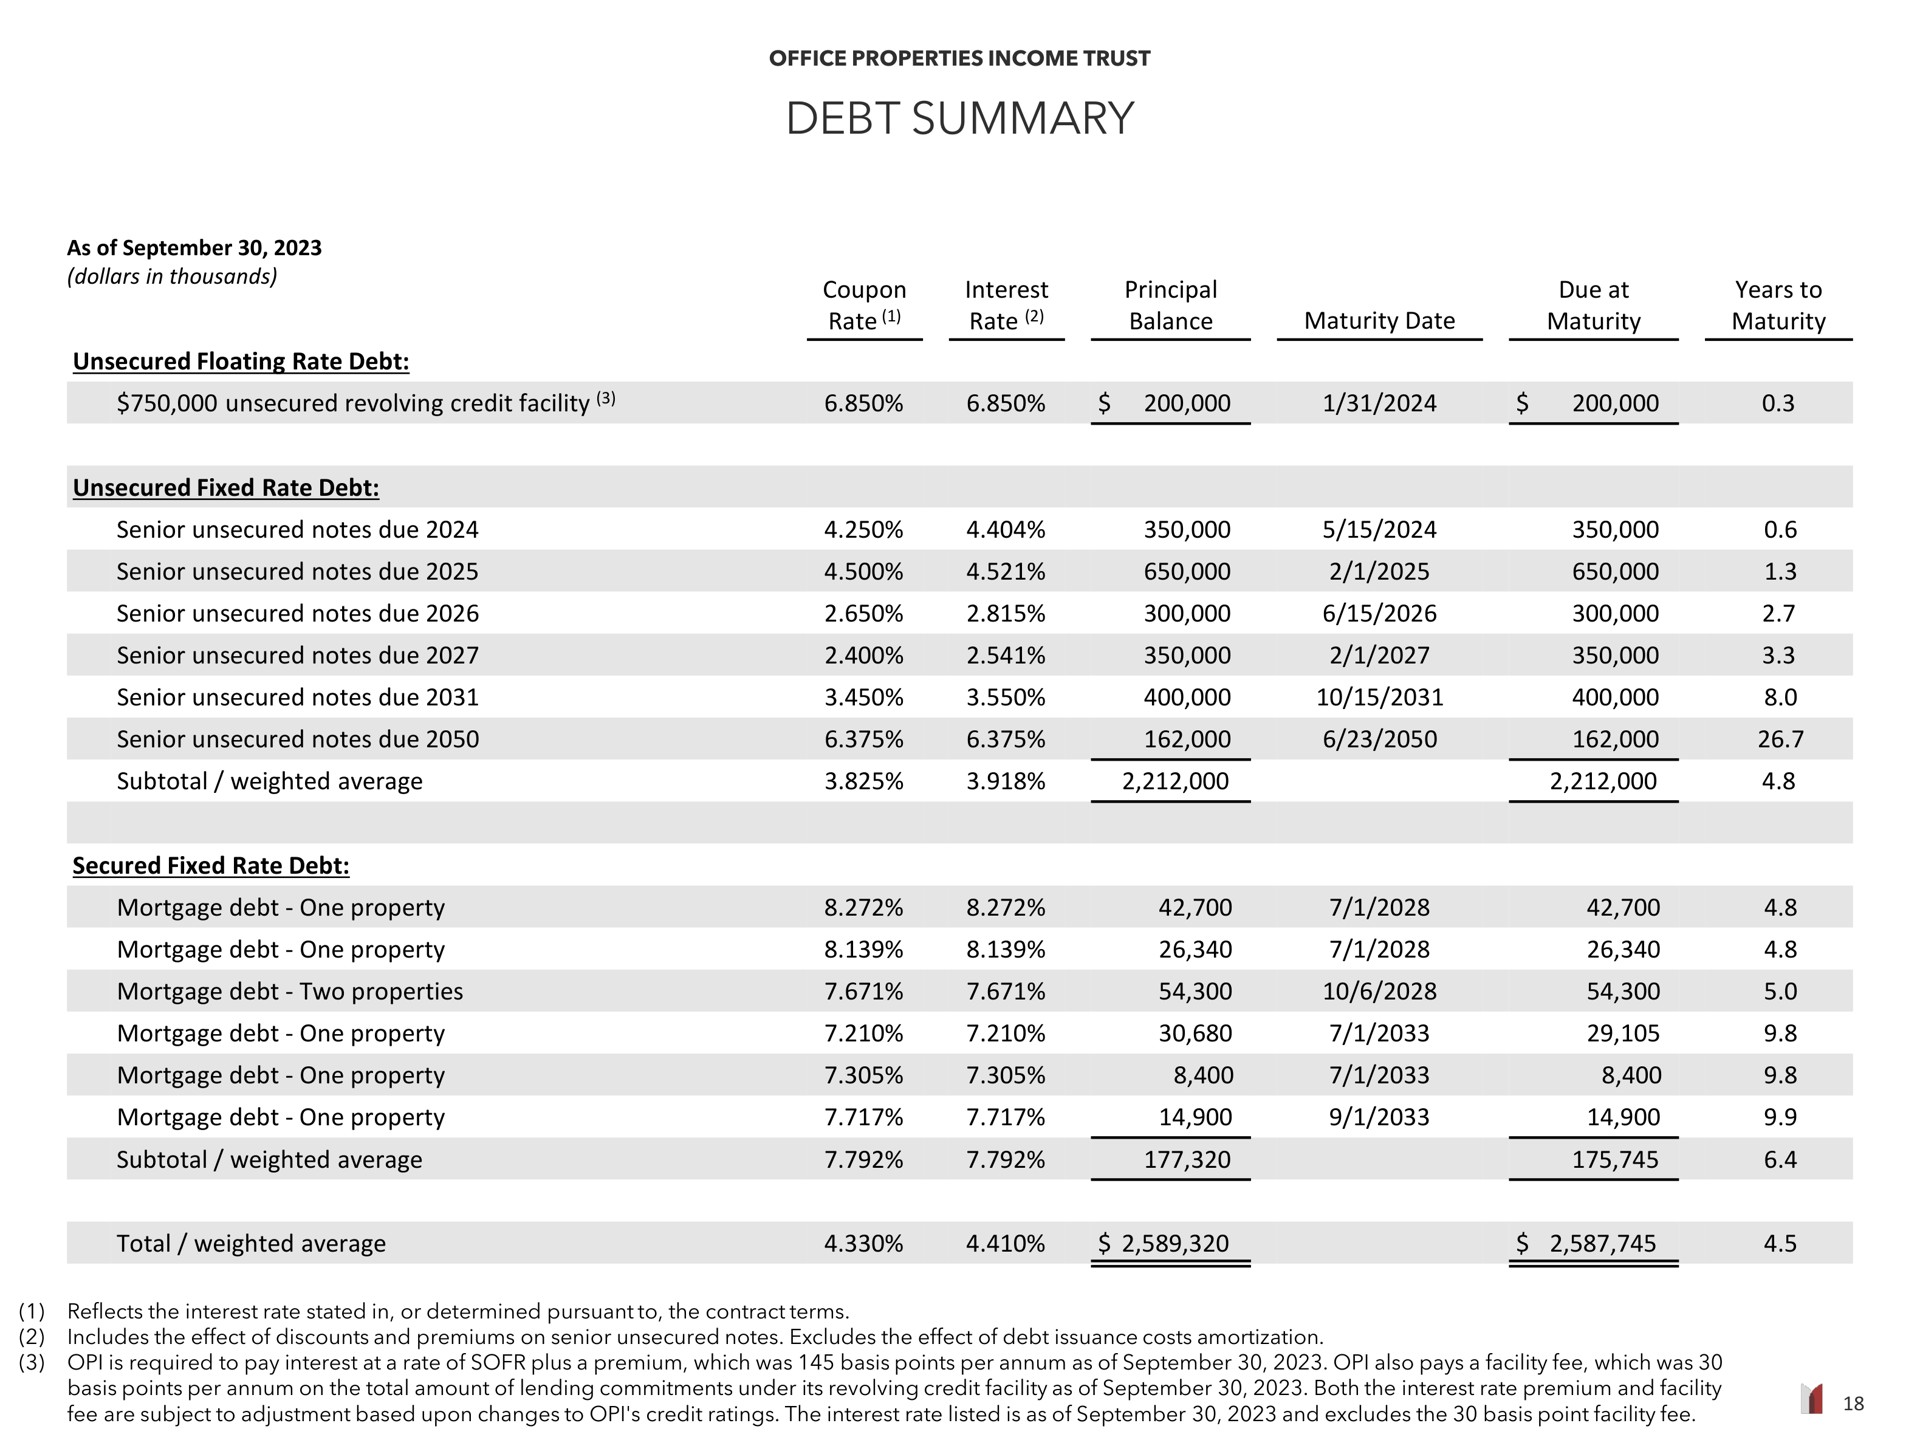 debt summary is | Office Properties Income Trust